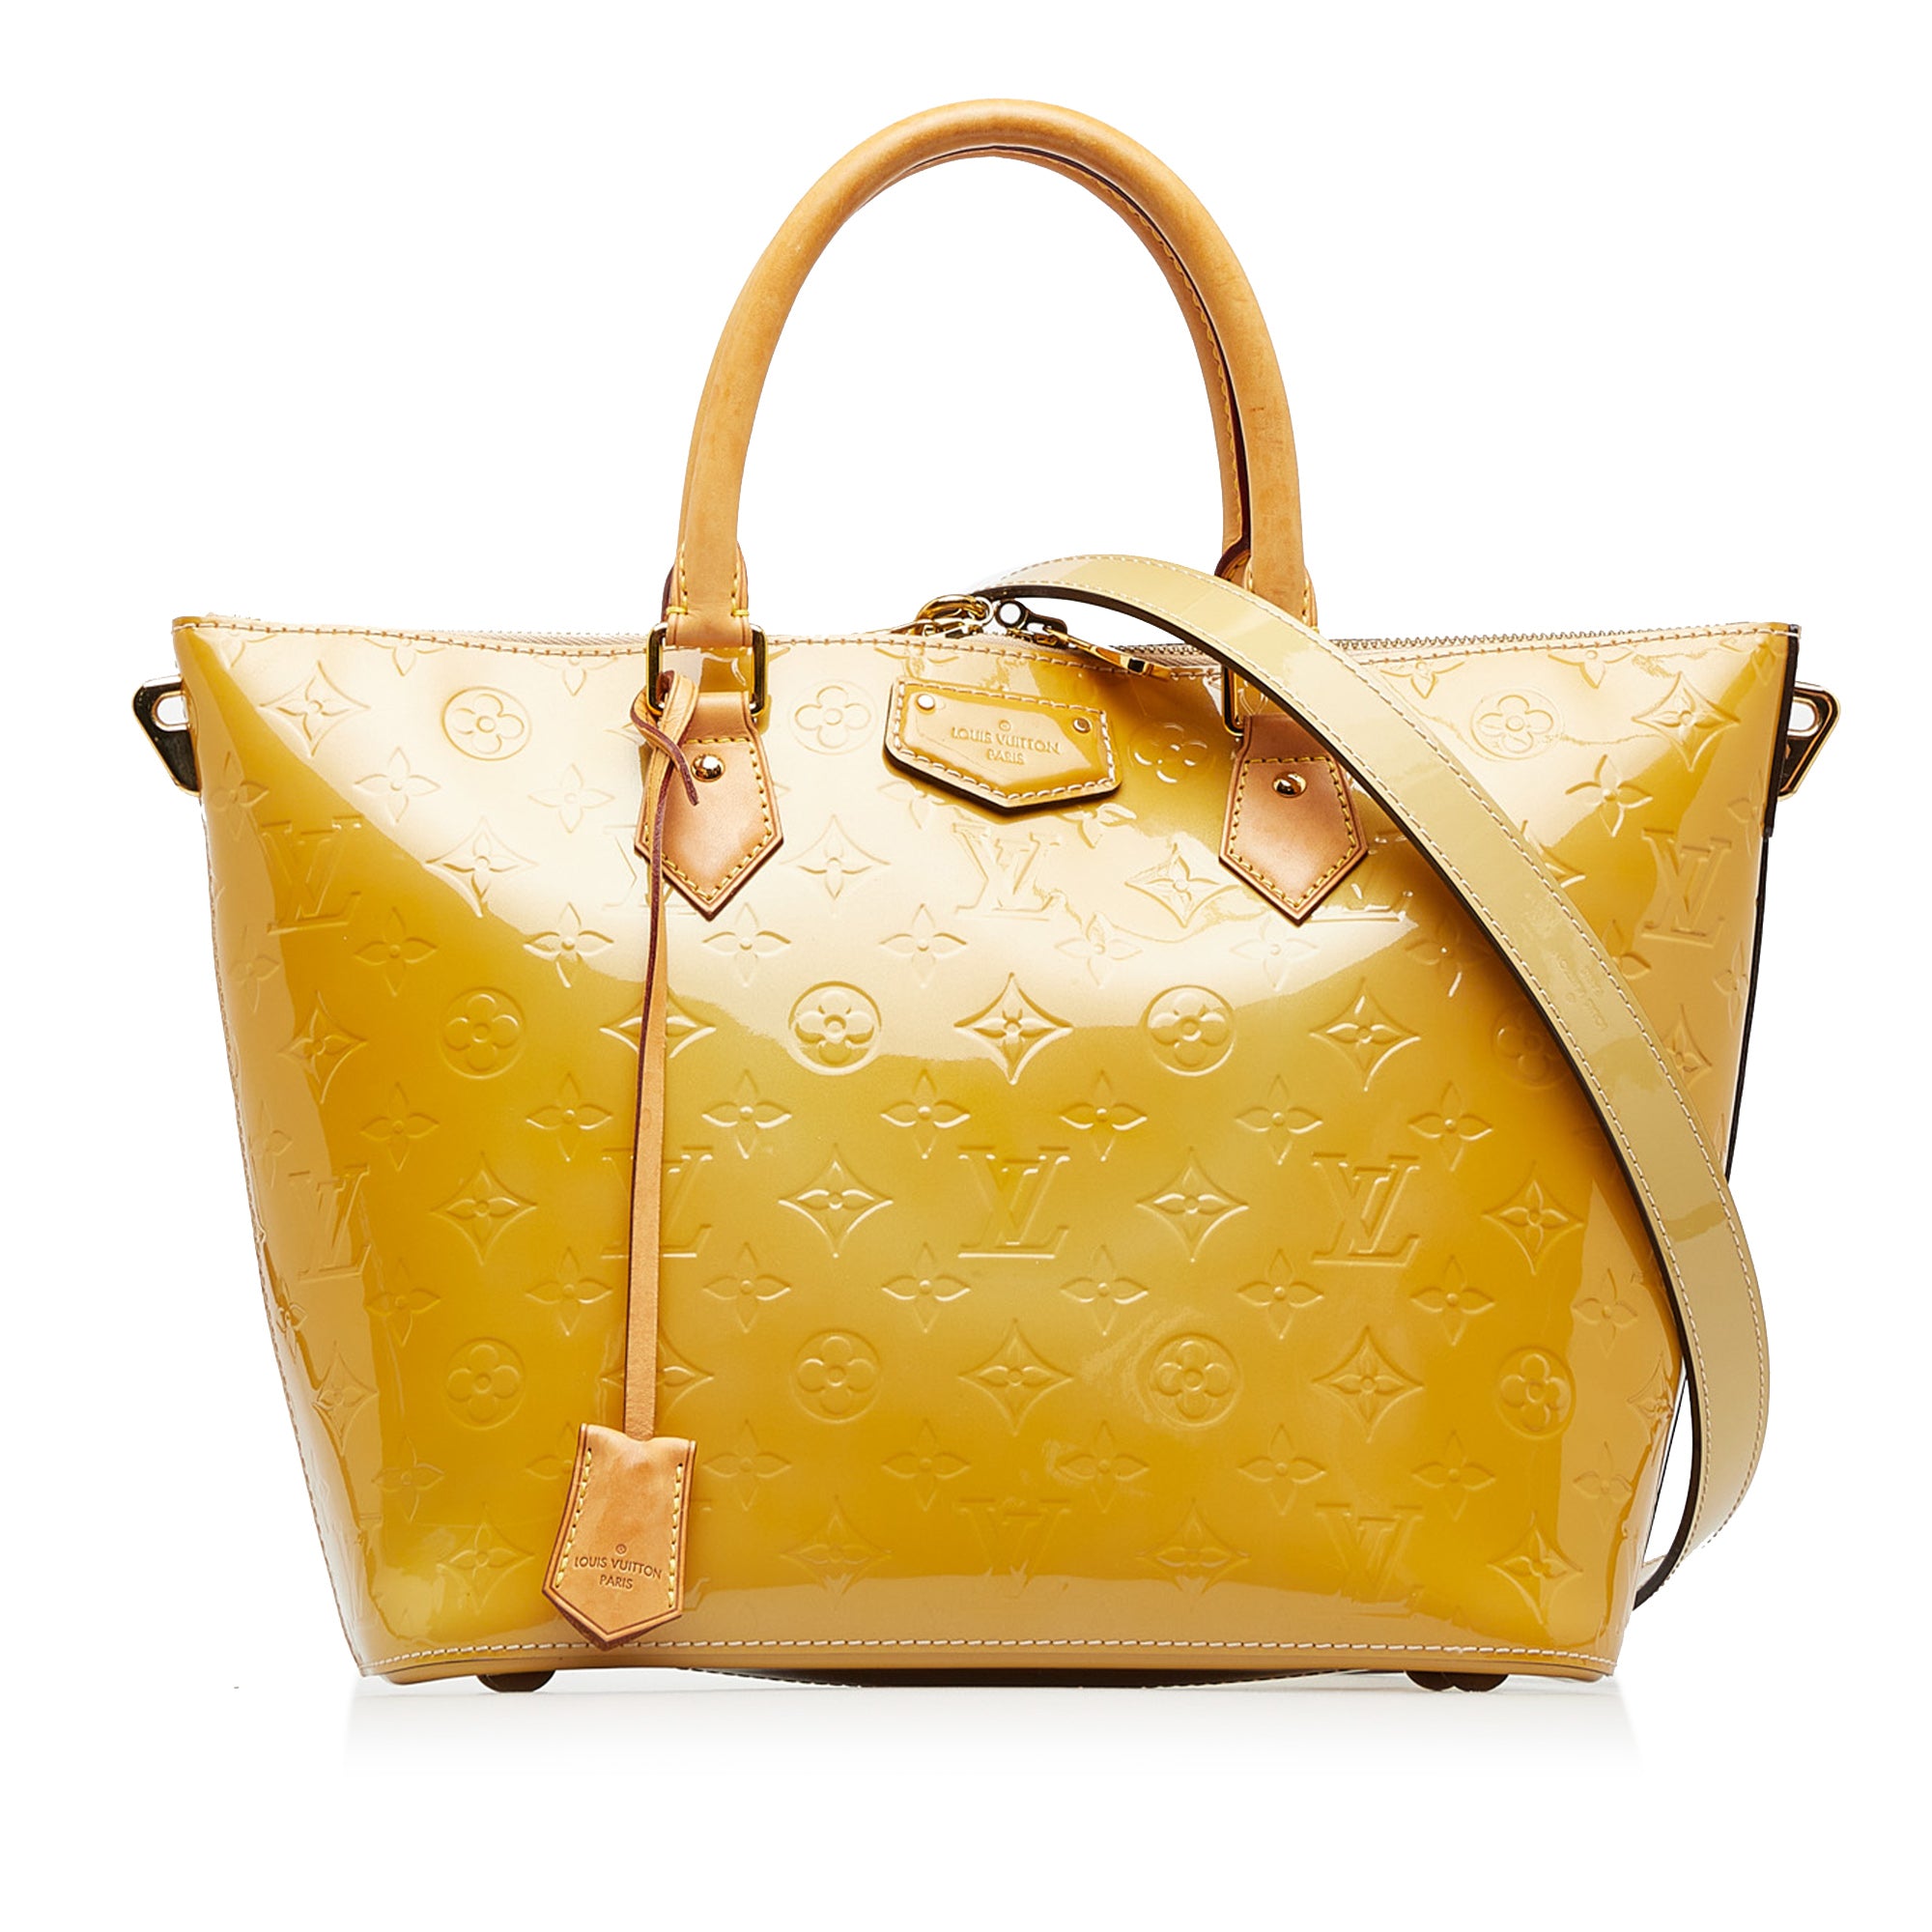 Louis Vuitton, SPECIAL EDITION VACHETTA BAGS AND ACCESSORIES